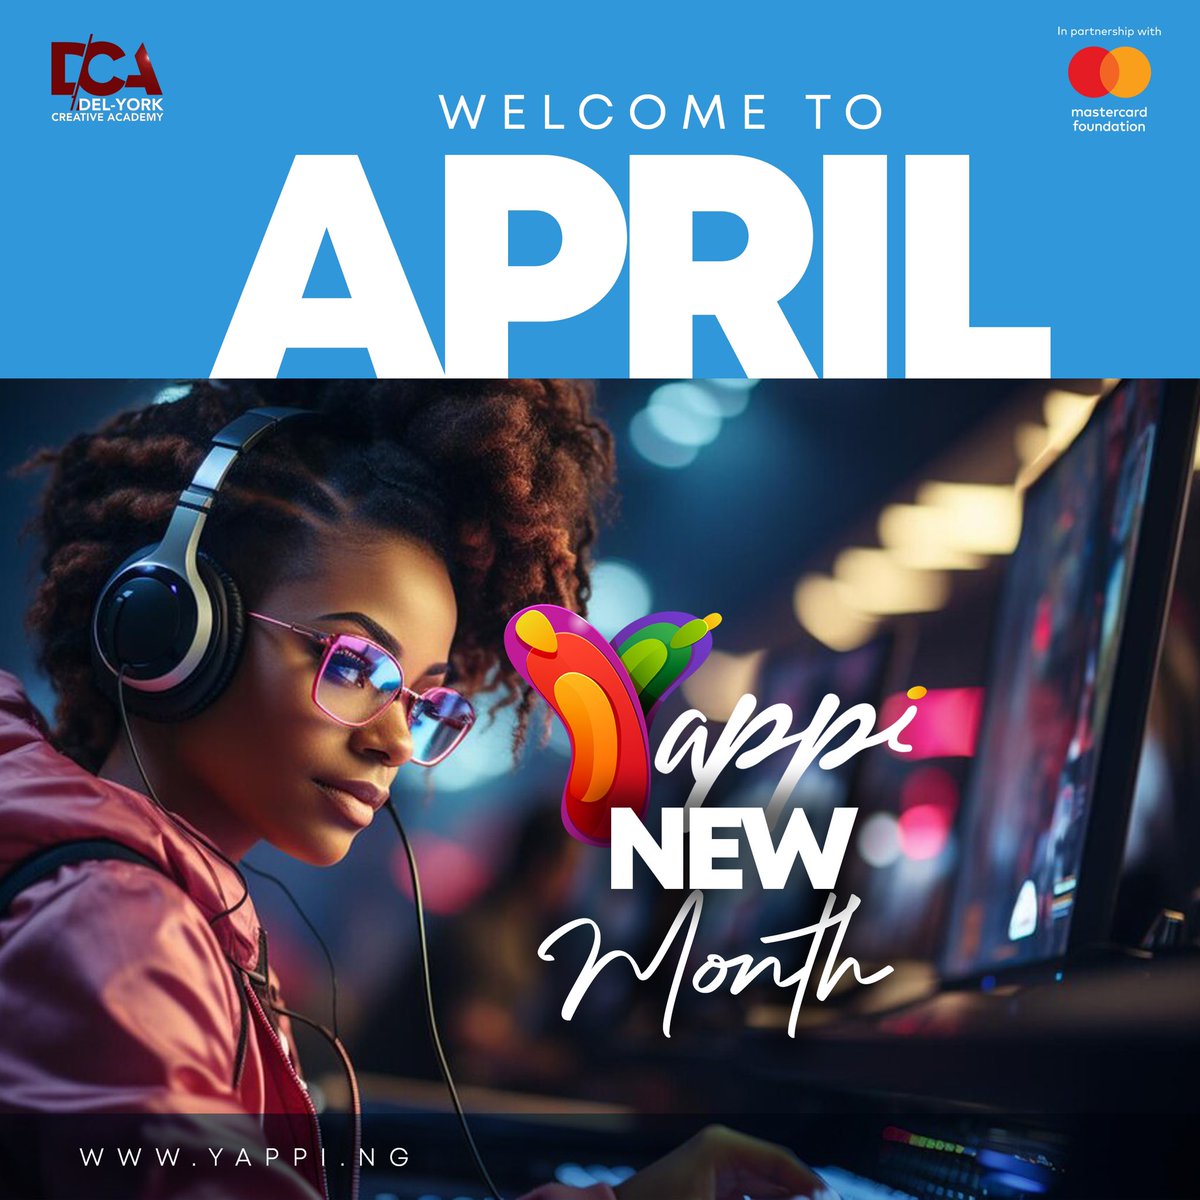 YAPPI new month!

Let's make April a masterpiece! ✨ This month, take a leap of faith like a character stepping off the storyboard and into reality. 

Learn Animation for free at YAPPI. 

#Yappi #NewMonth #DreamBig #MasterCardfoundation #delyorkcreativeacademy #motivation #anime